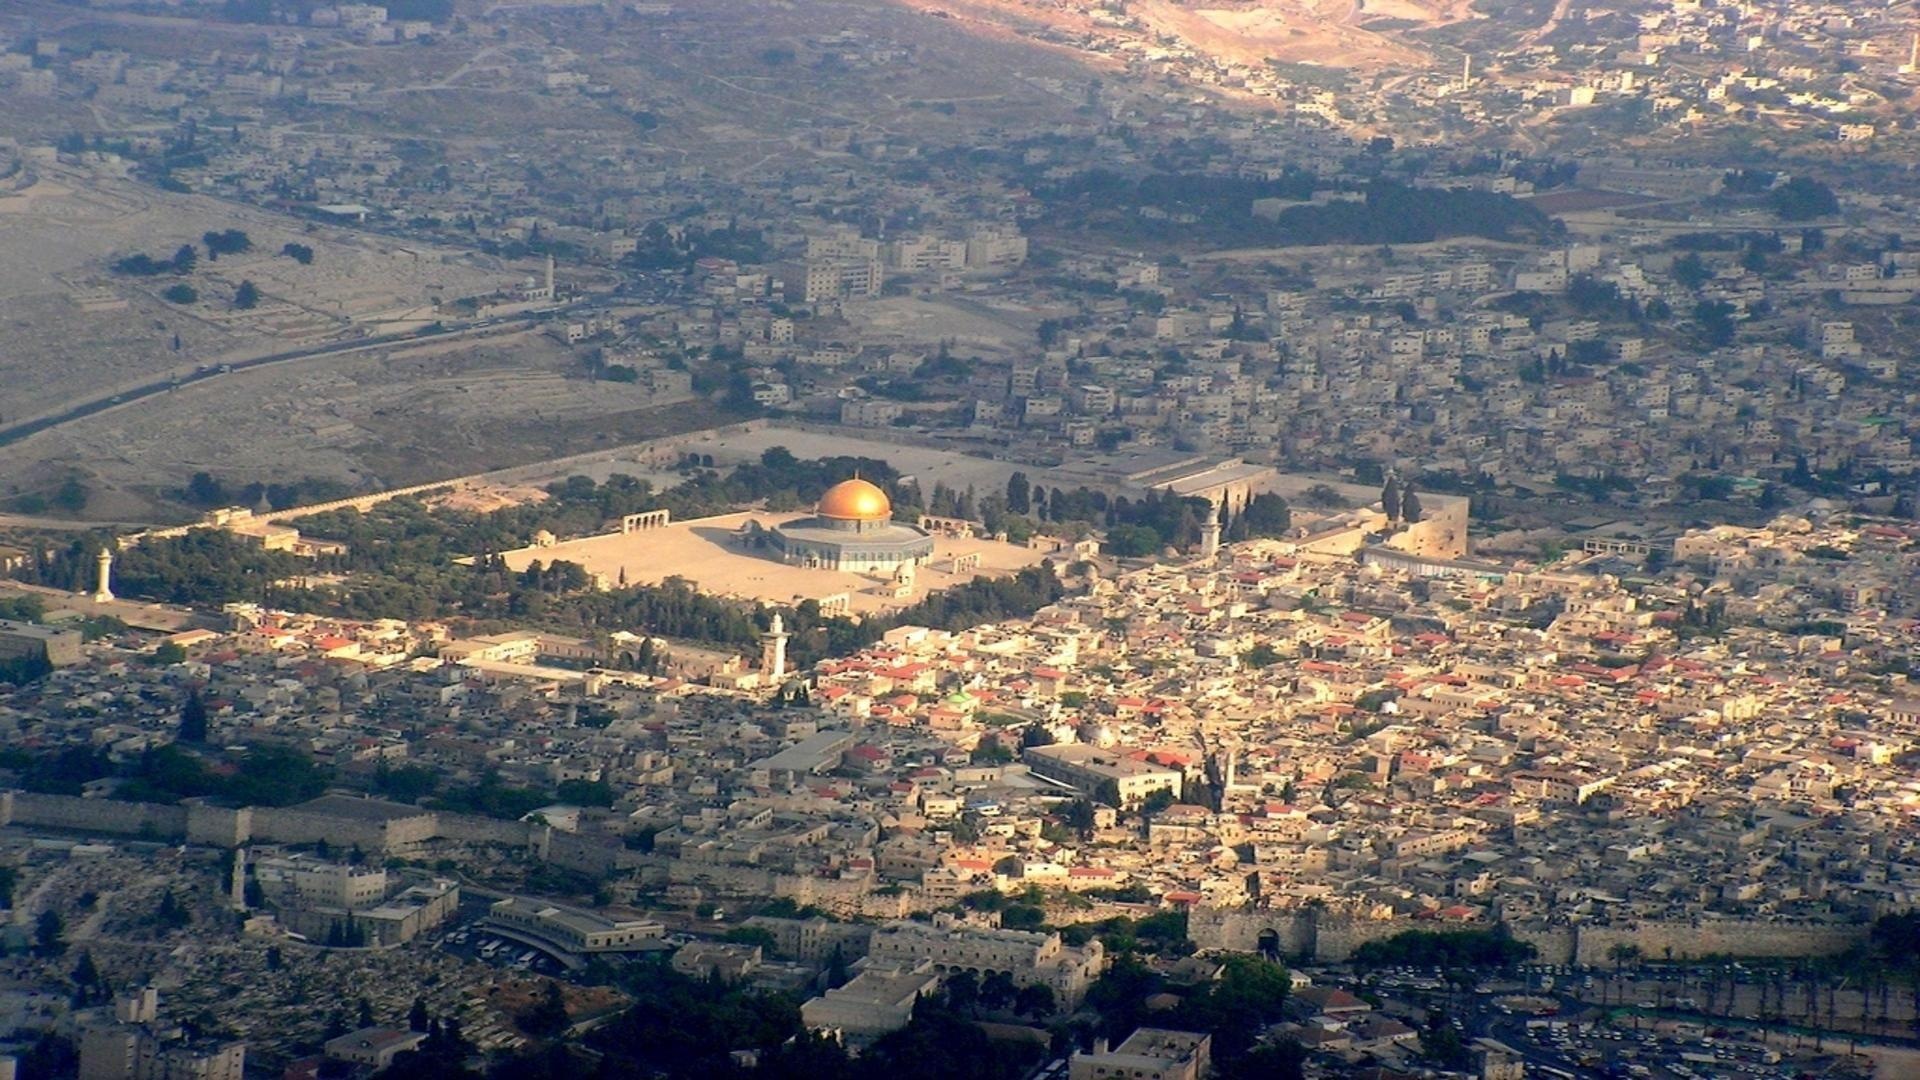 Jerusalem: A site of major significance for the three largest monotheistic religions: Judaism, Islam, and Christianity, Cityscape. 1920x1080 Full HD Wallpaper.